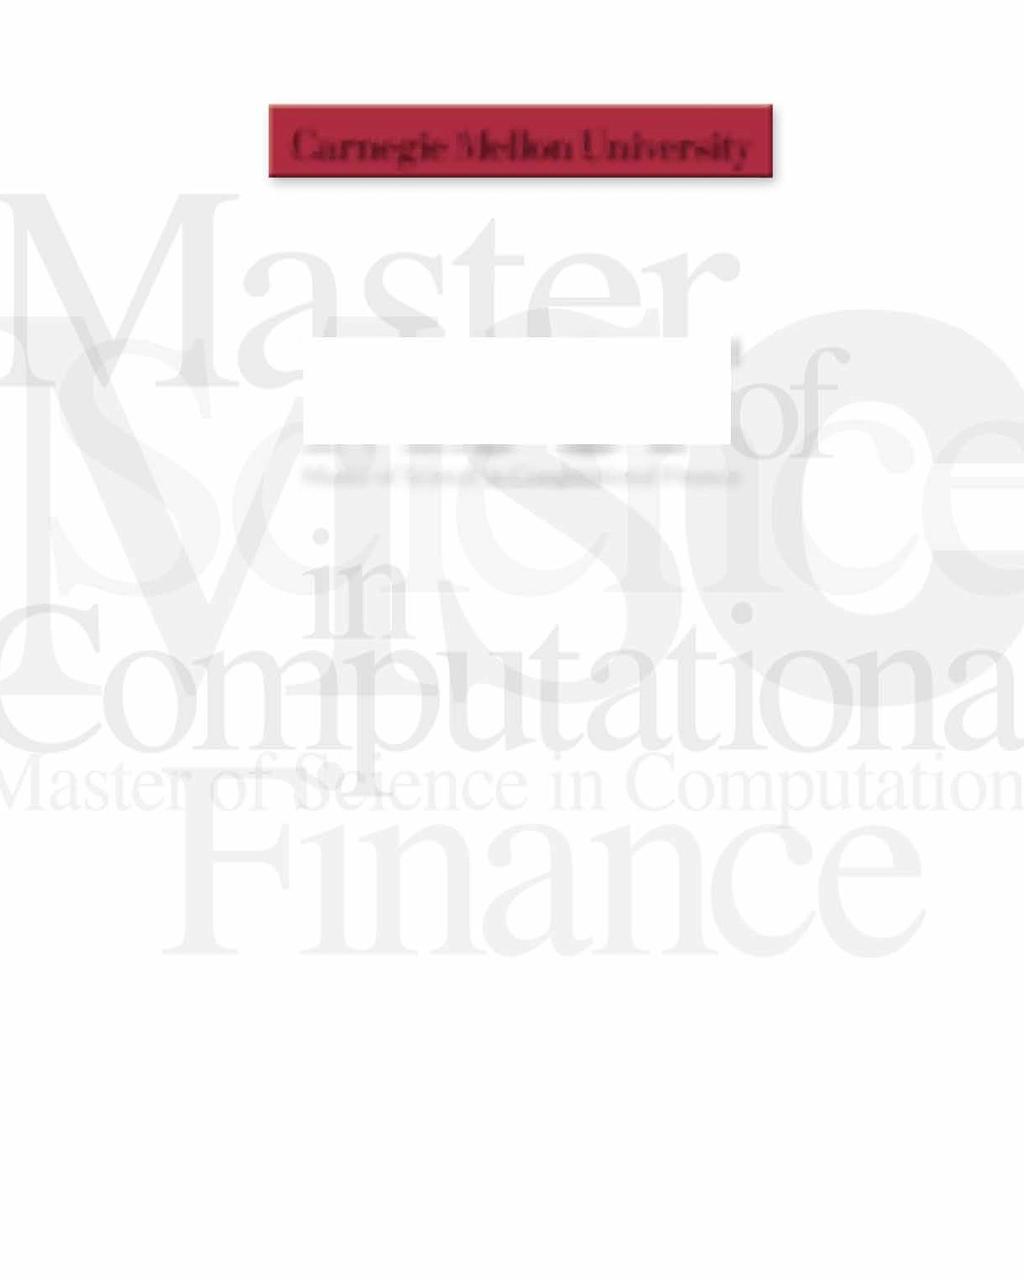 Carnegie Mellon University Master of Science in Computational Finance QuantConnect Employer